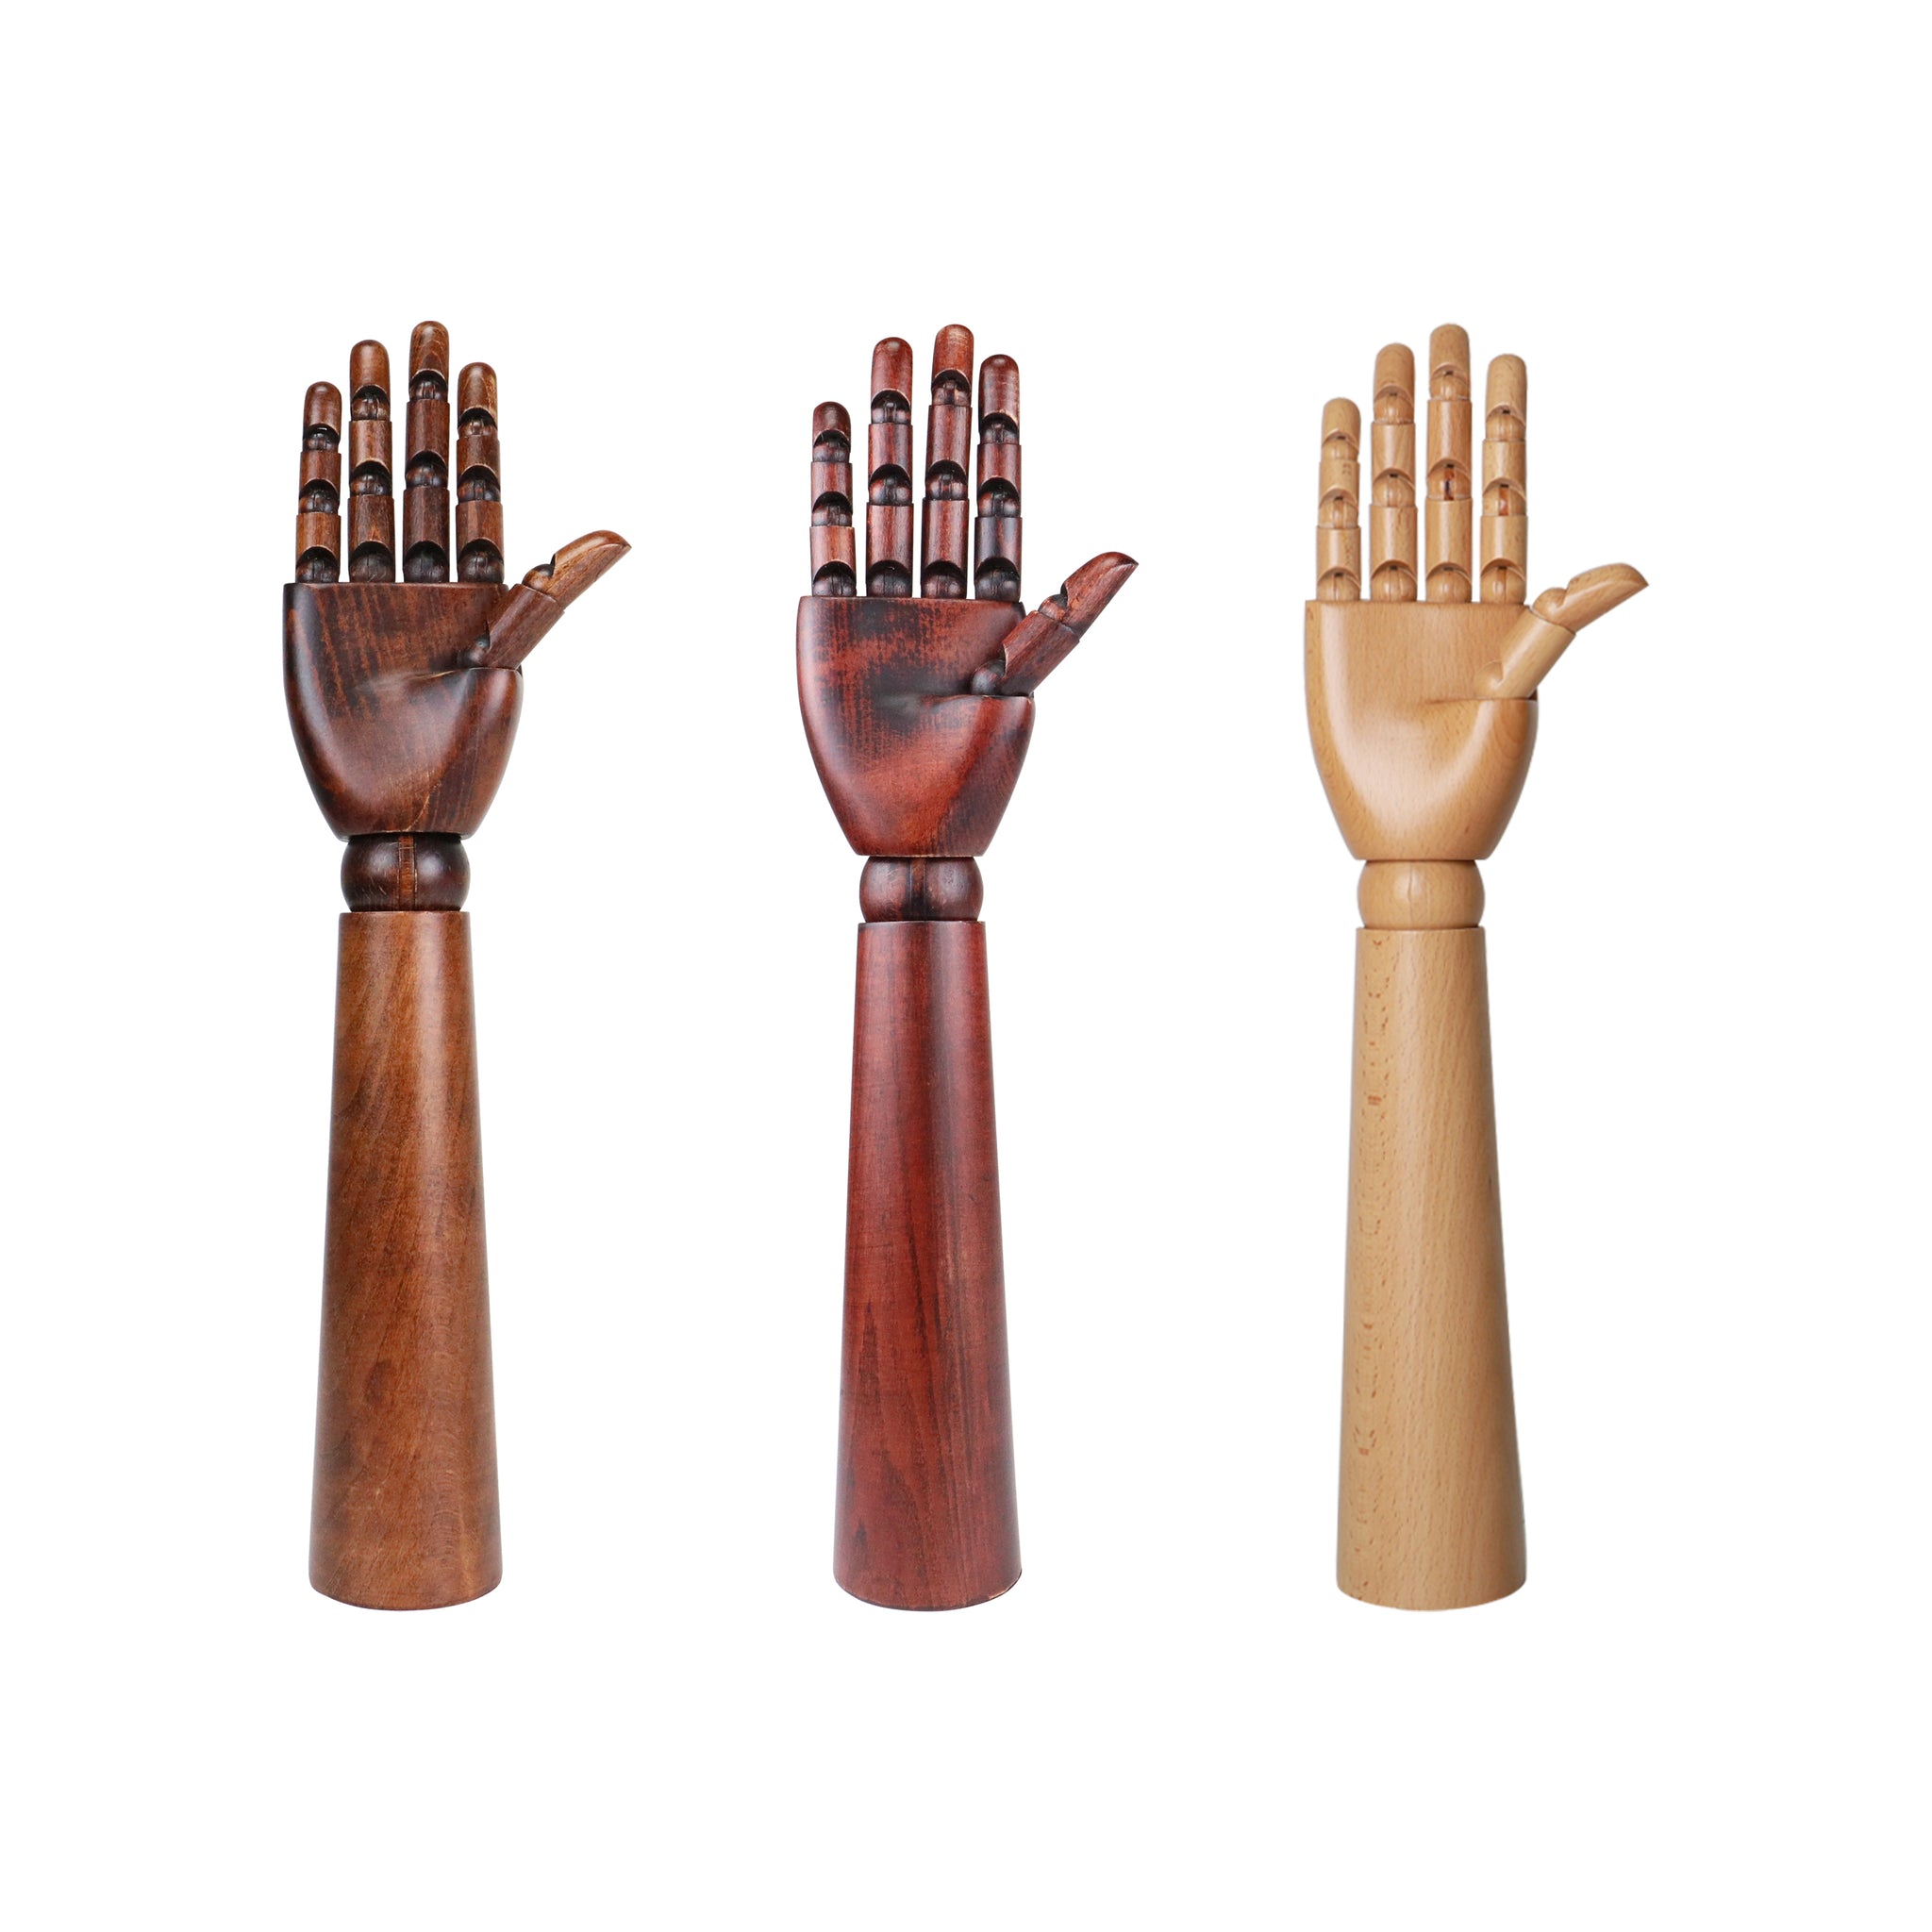 Left and Right Wooden Mannequin Hands for Nails Flexible Movable Fingers  Manikin Arms,Jewelry Display Props Artist Model Hand mannequin